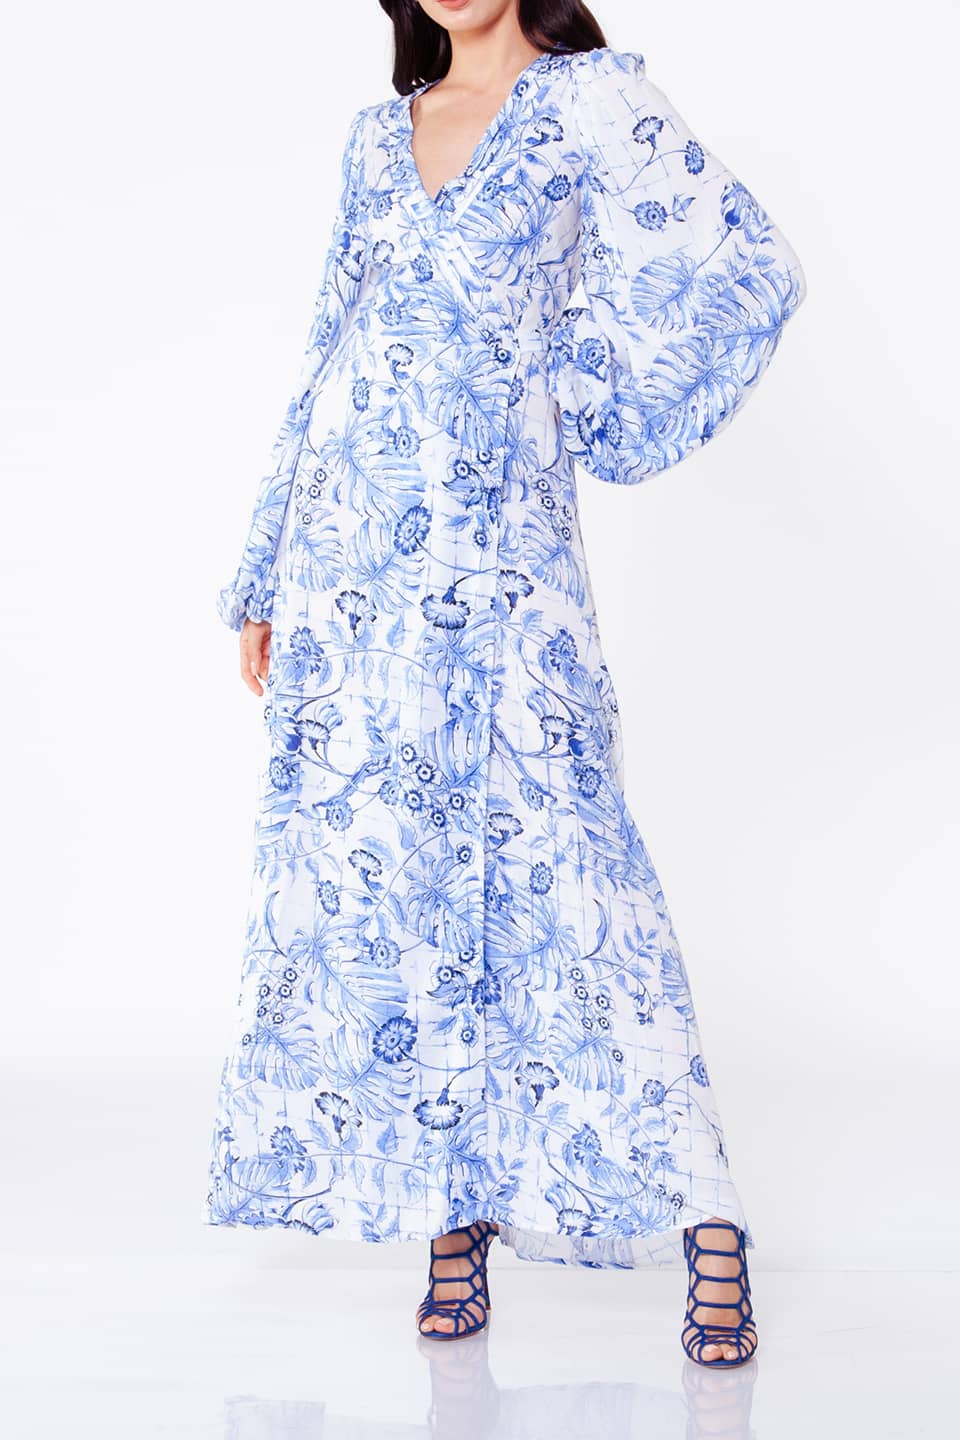 Thumbnail for Product gallery 2, Blue Floral Maxi Dress